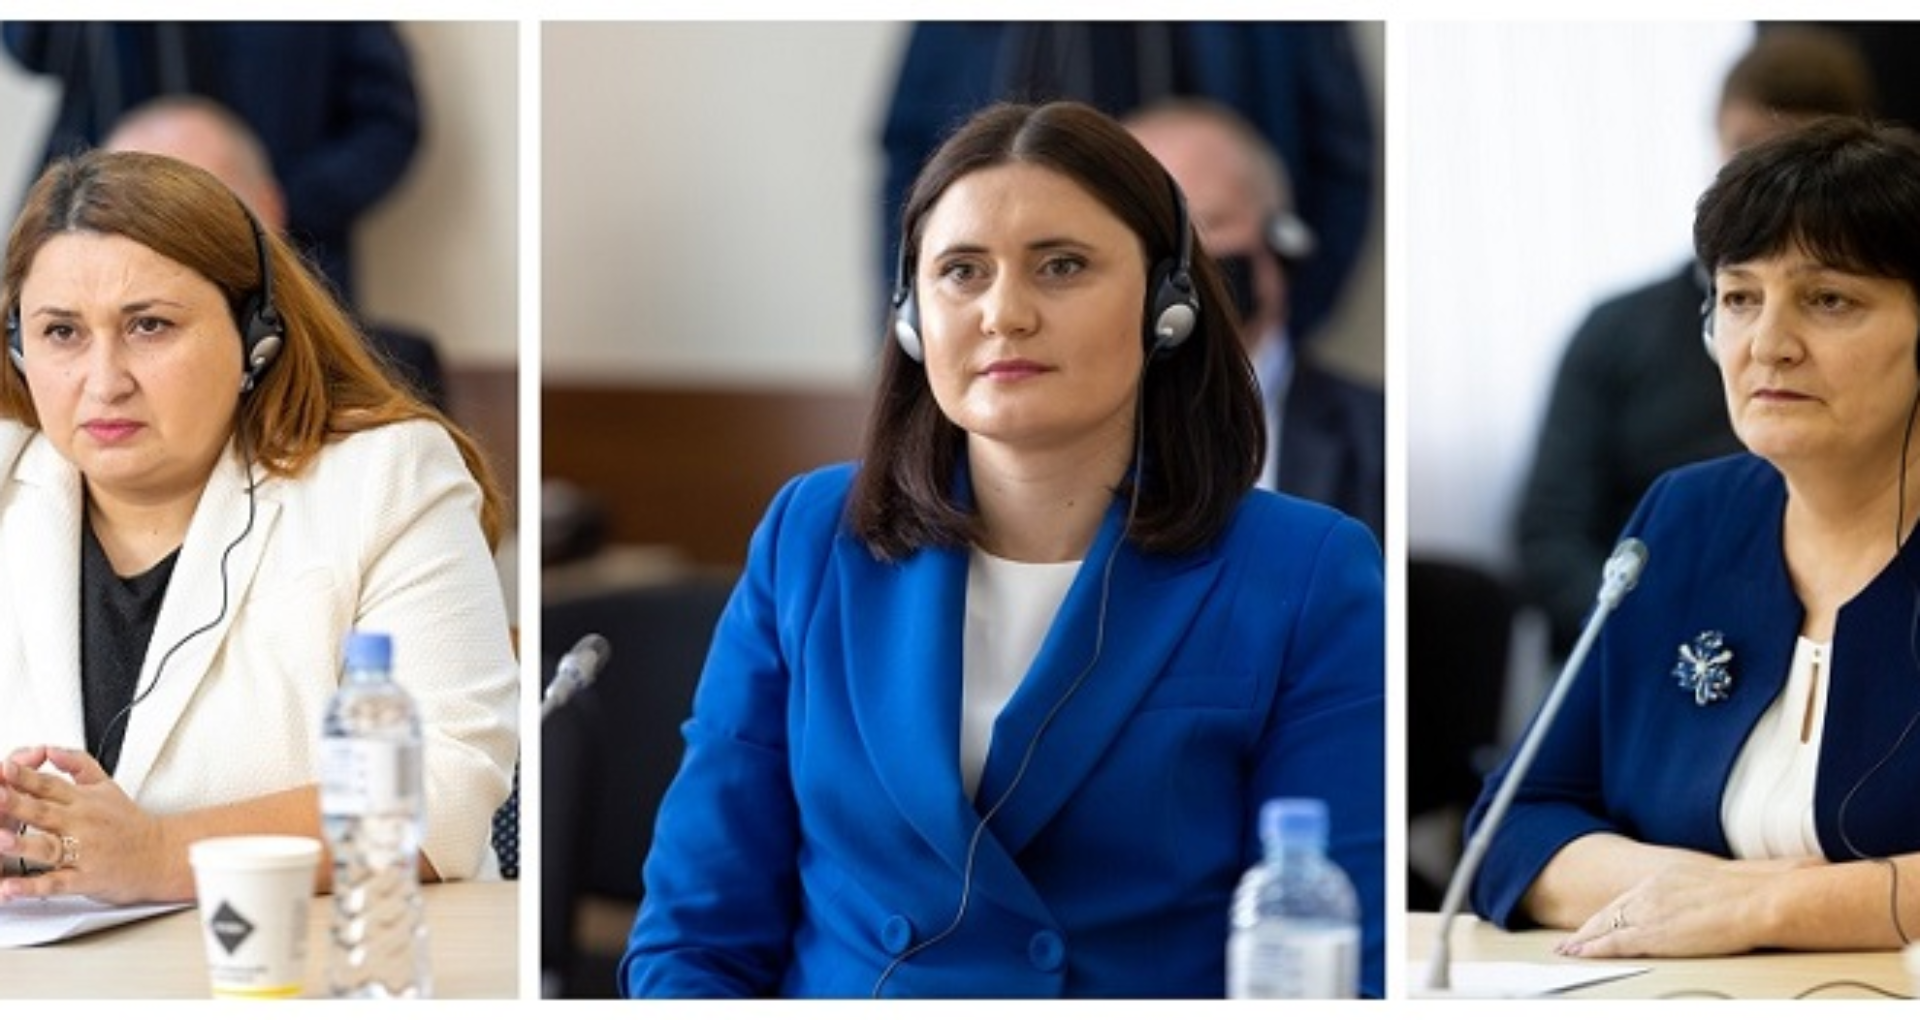 PROMOTED: The first three female magistrates, candidates for membership of the Superior Council of Magistracy have passed the assessment of financial and ethical integrity